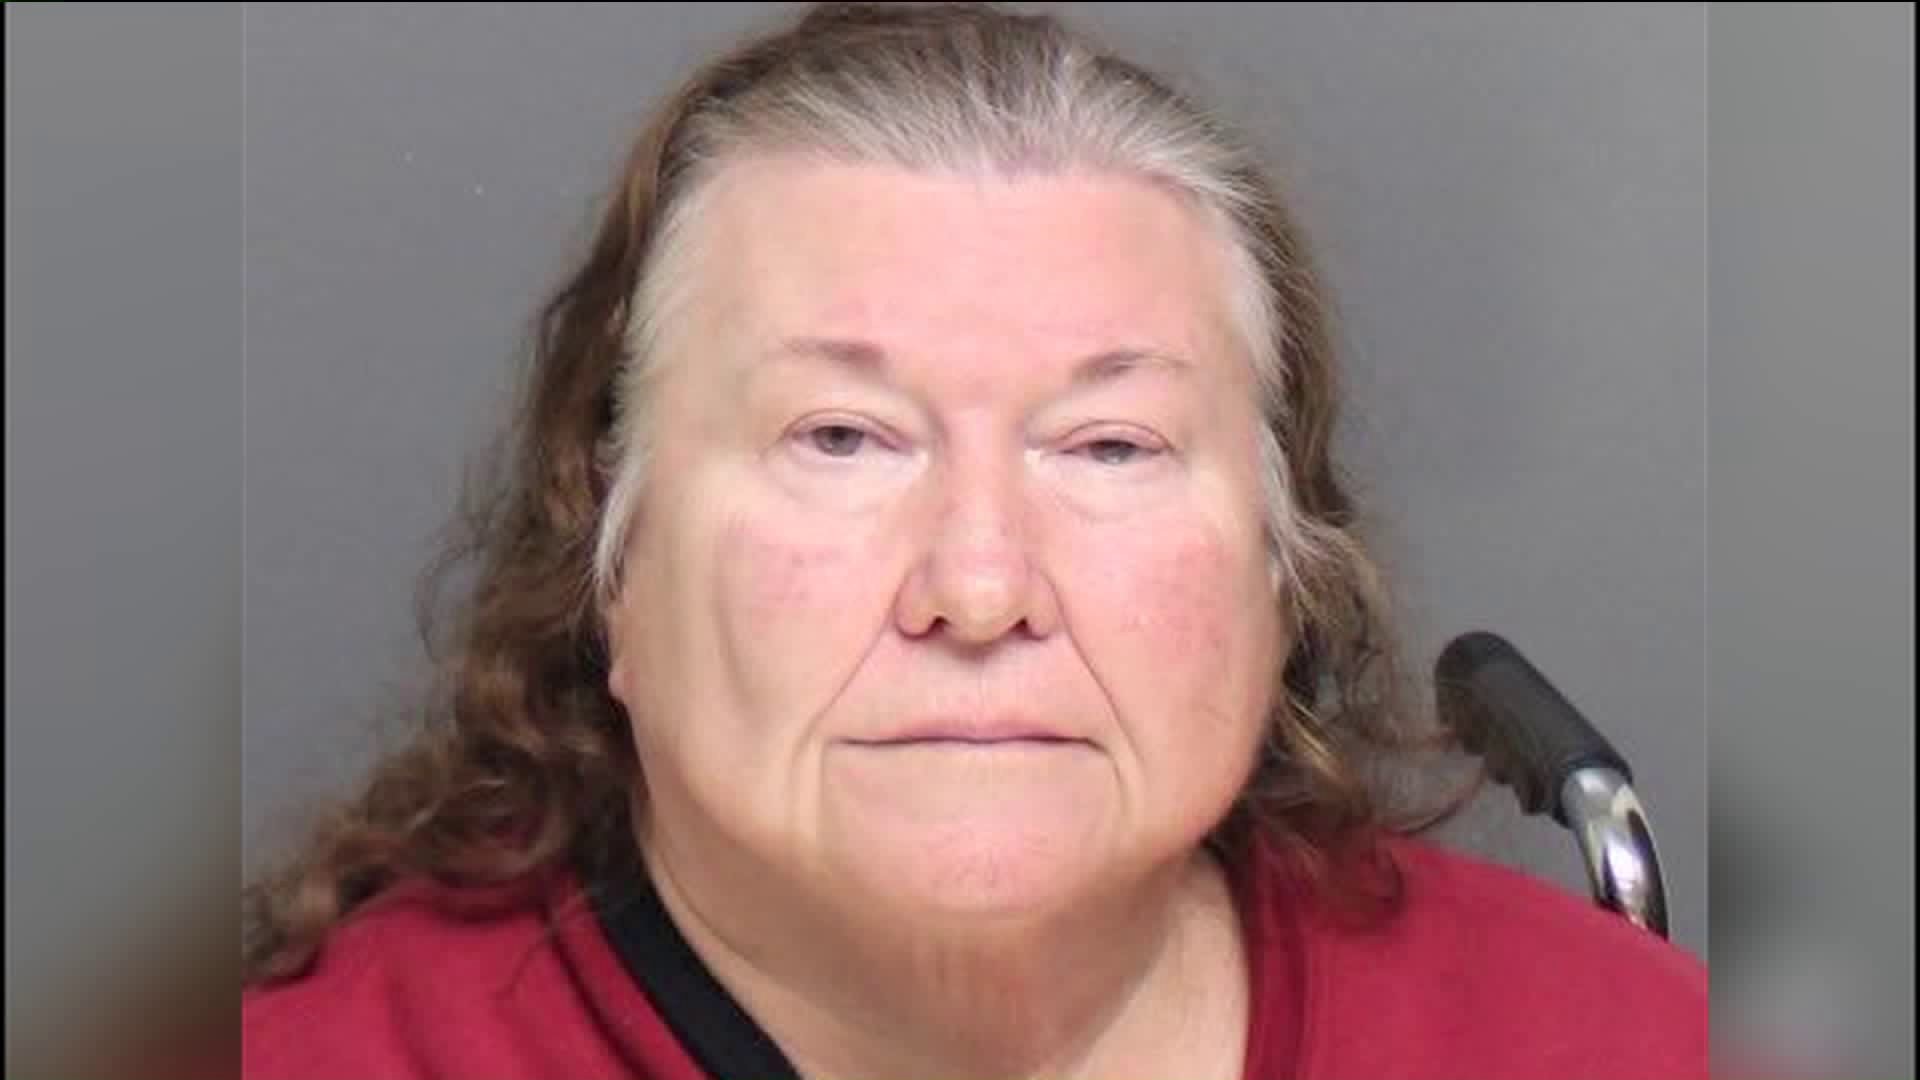 Police say former caretaker arrested in connection with desecration of graves at Bridgeport cemetery